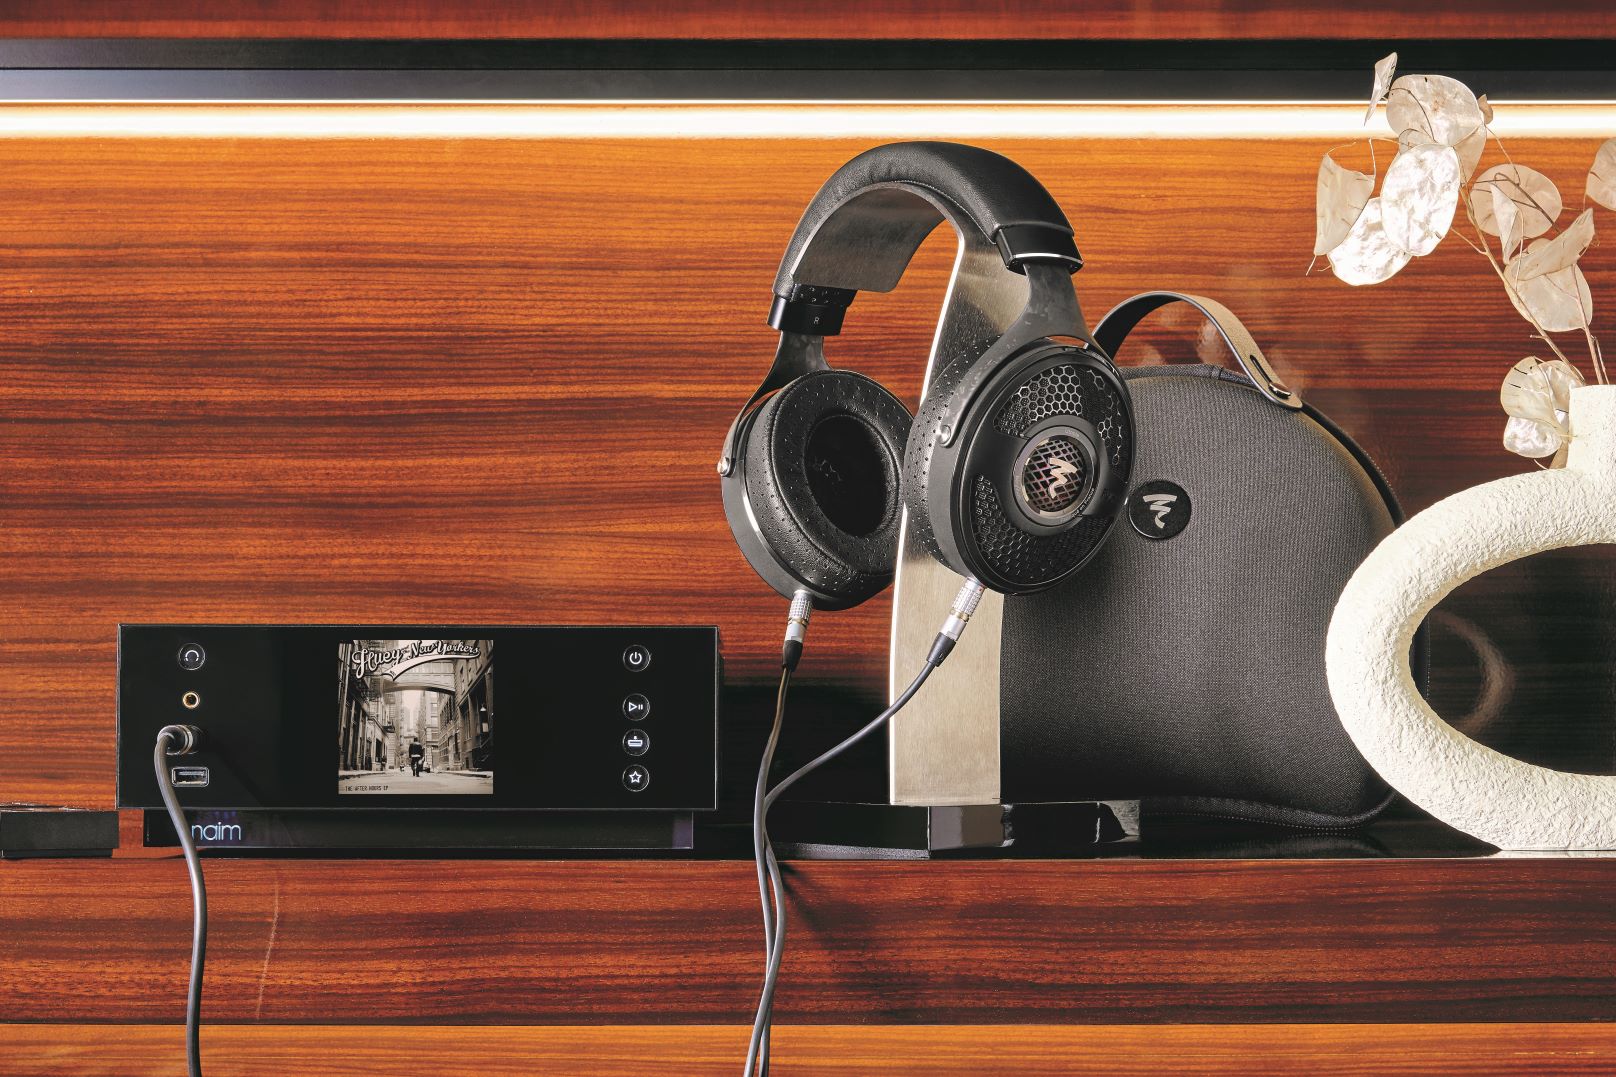 Last Chance For Father’s Day: Save 20% On Focal Headphones Today!